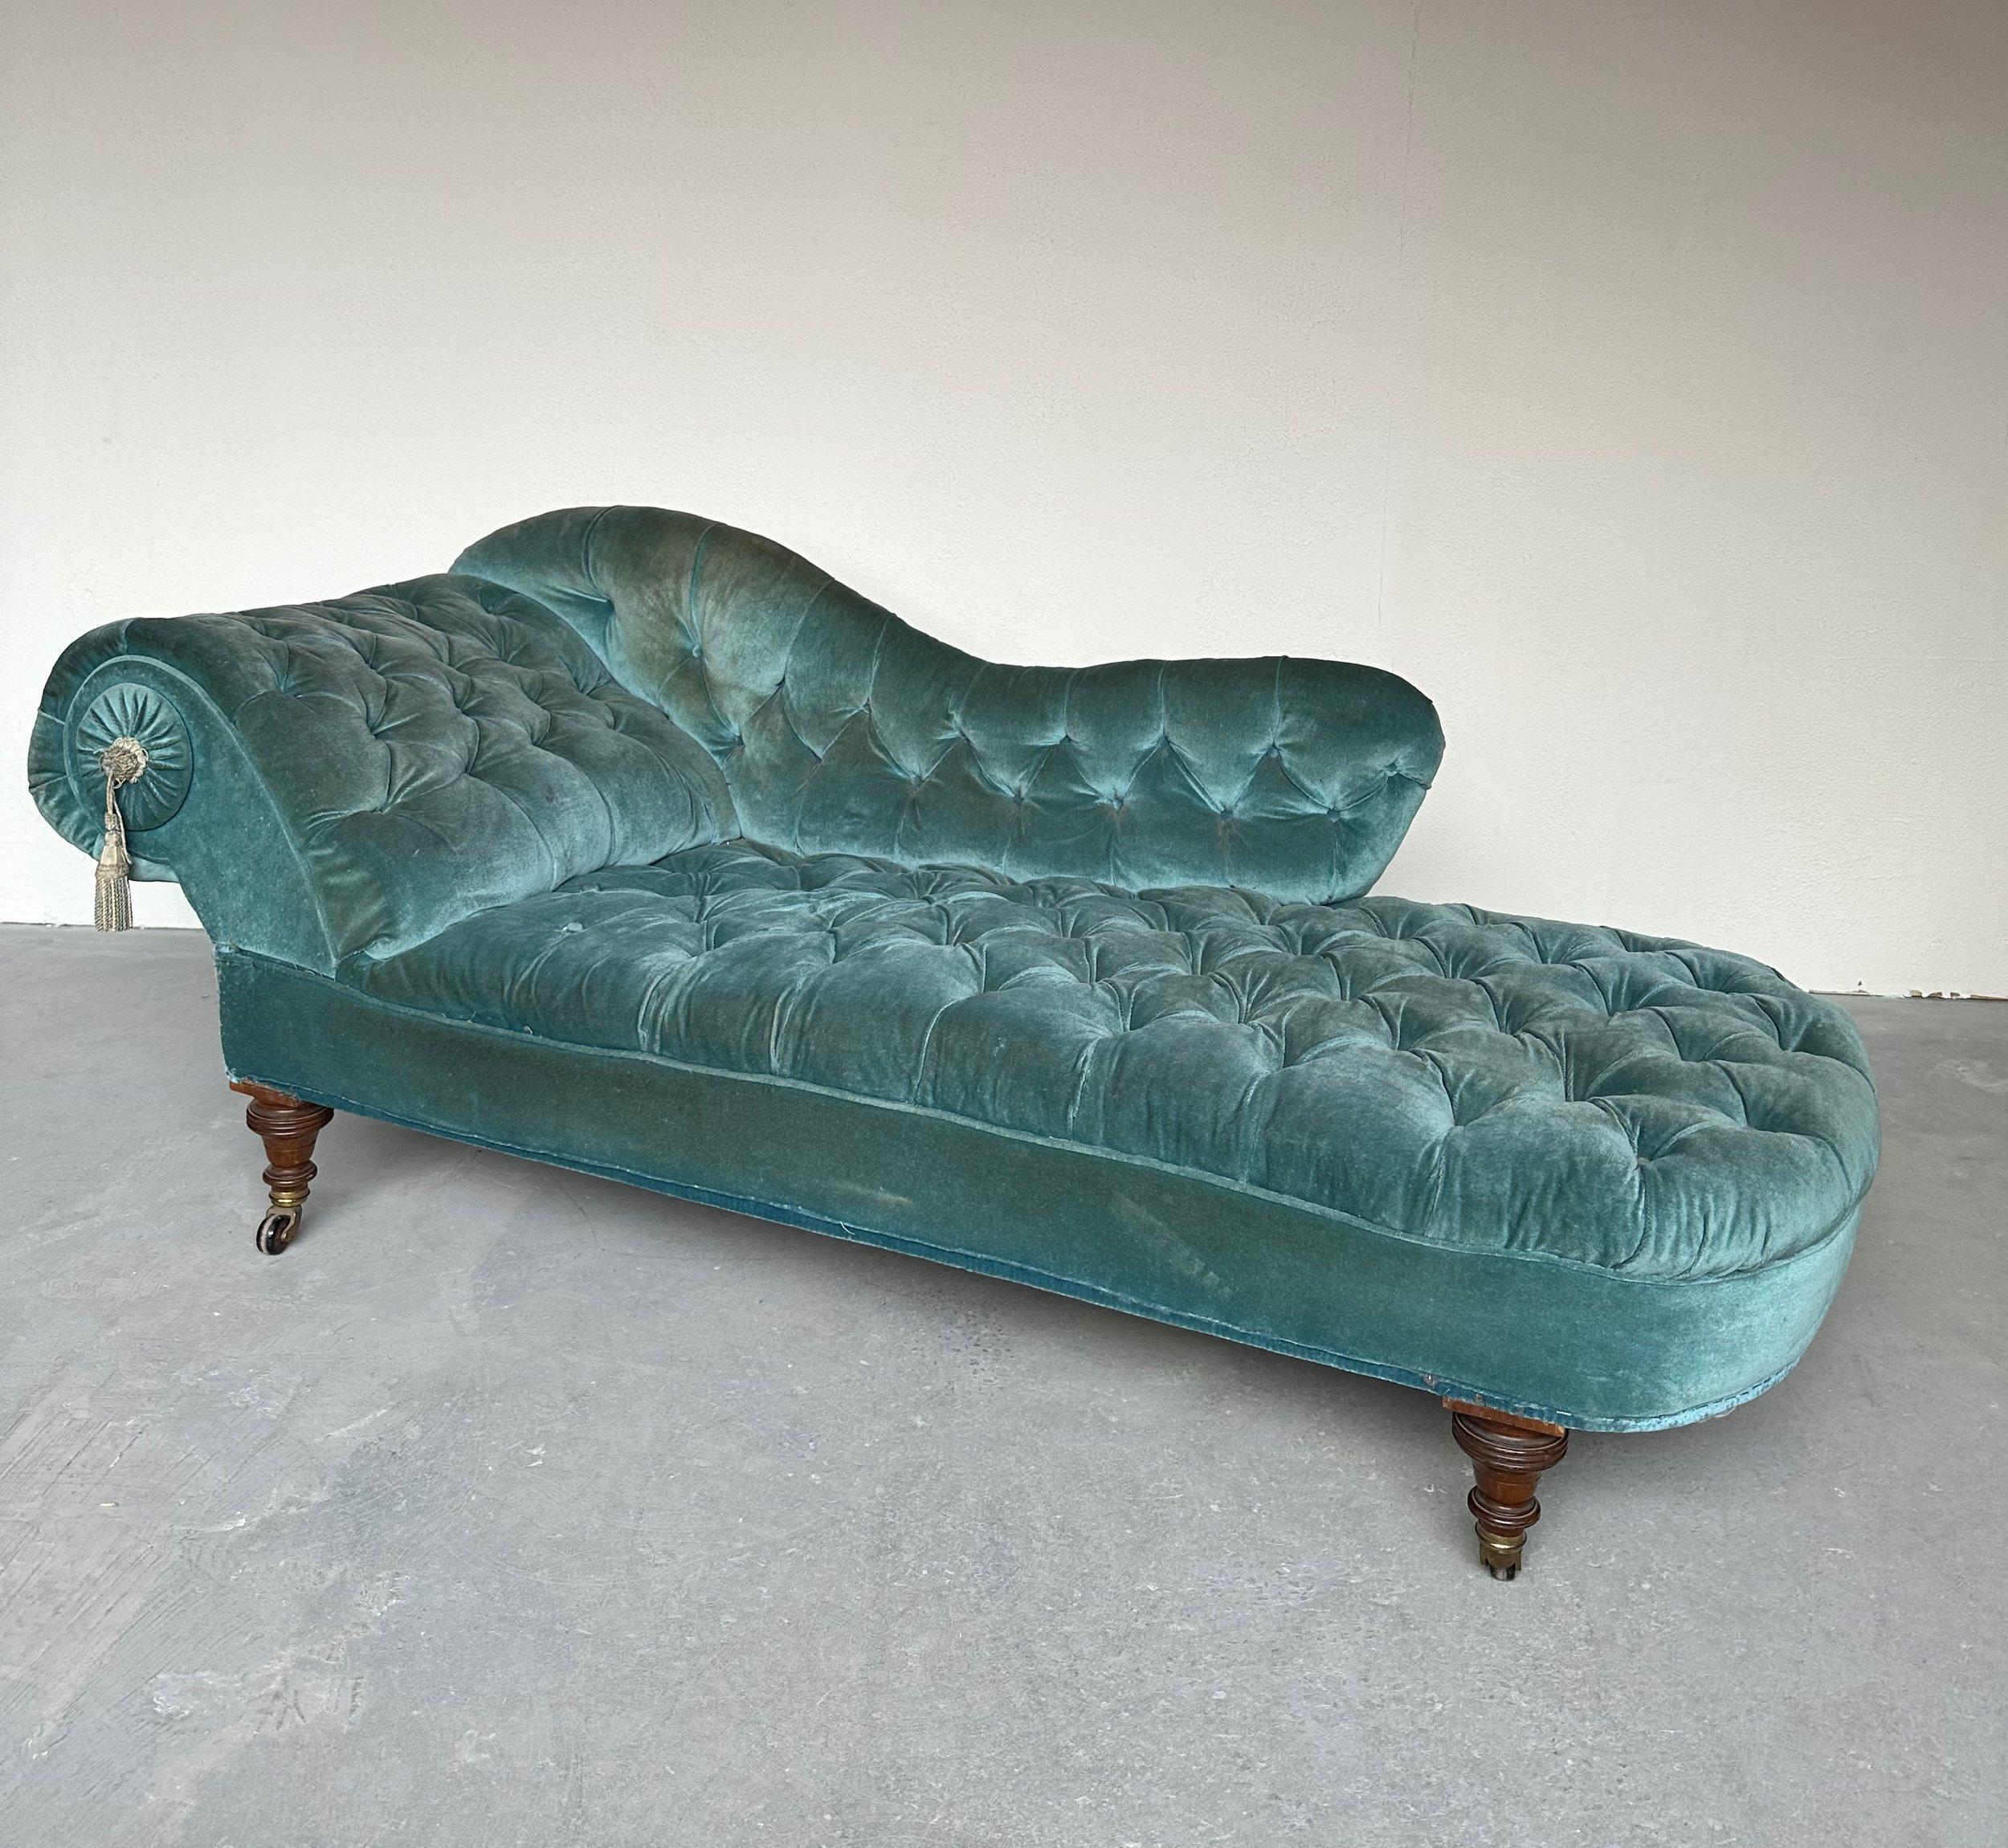 This elegant French 19th century Napoleon III tufted chaise lounge showcases the artistry of the period. It features a gracefully sloped and curved extended left arm, and scrolled back with a decorative tassle accent. The interior of the back and